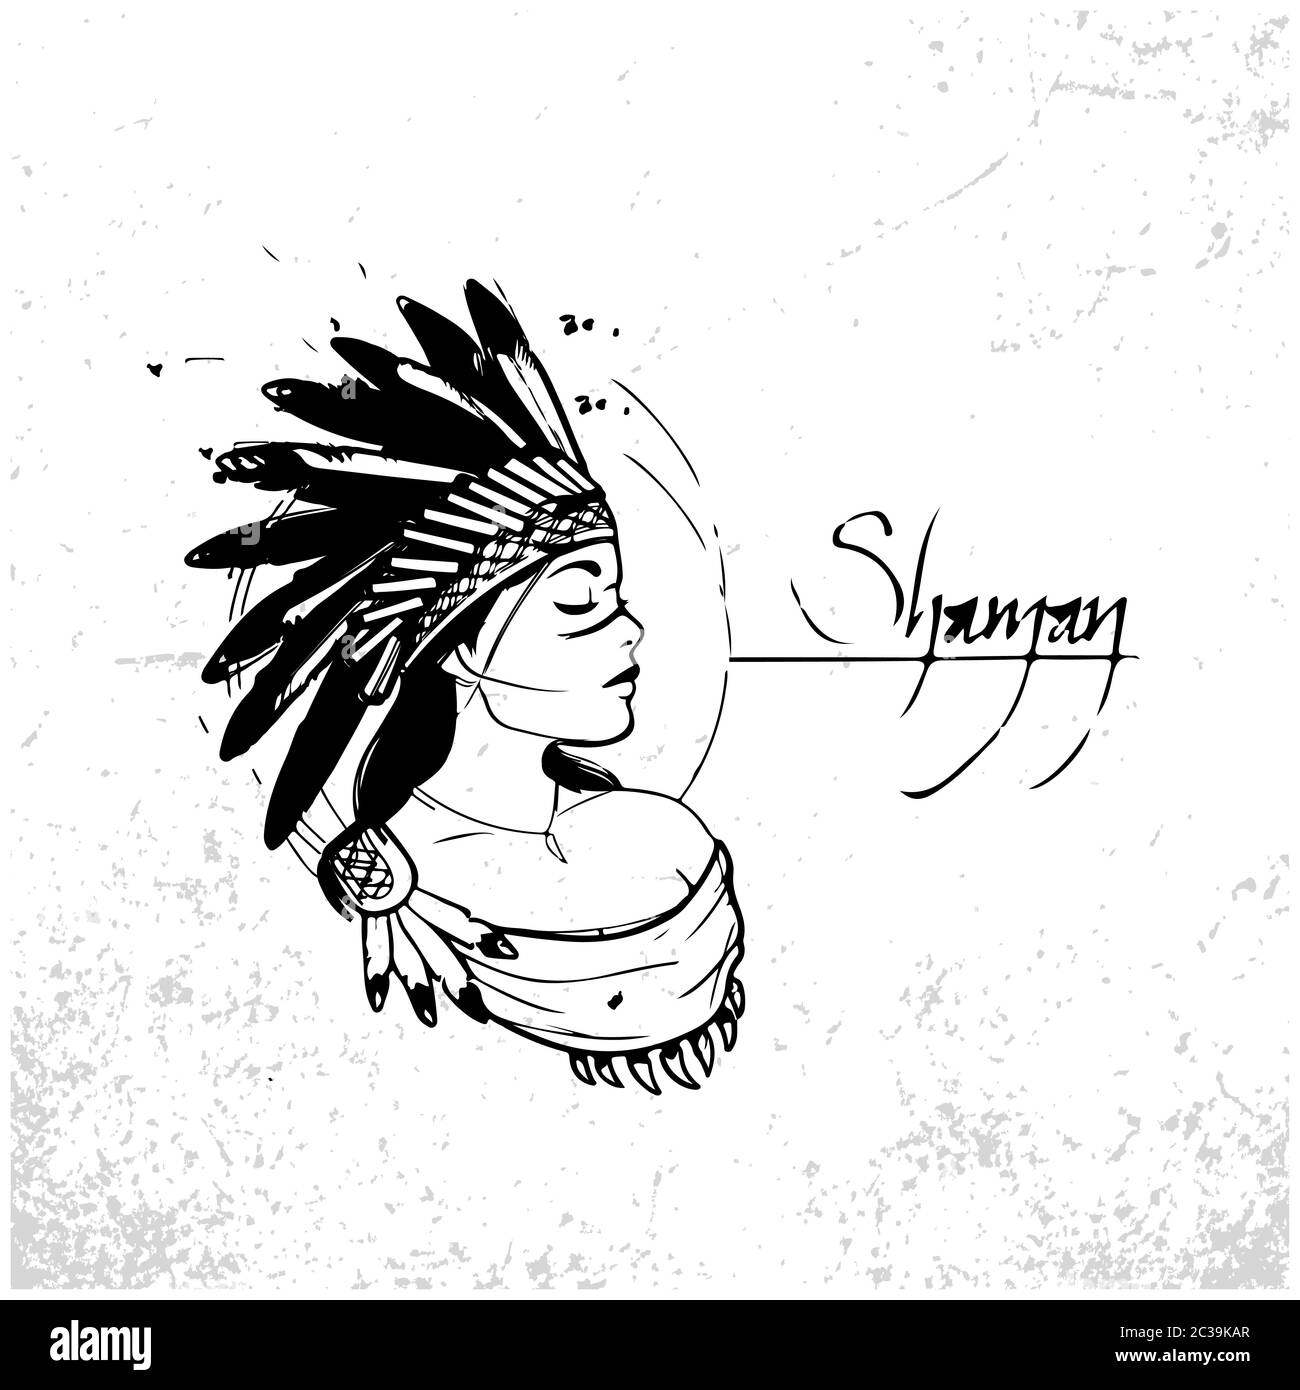 Woman in costume of American Indian. Sketch abstract to Create Distressed Effect. Overlay Distress grain design. Stock Vector